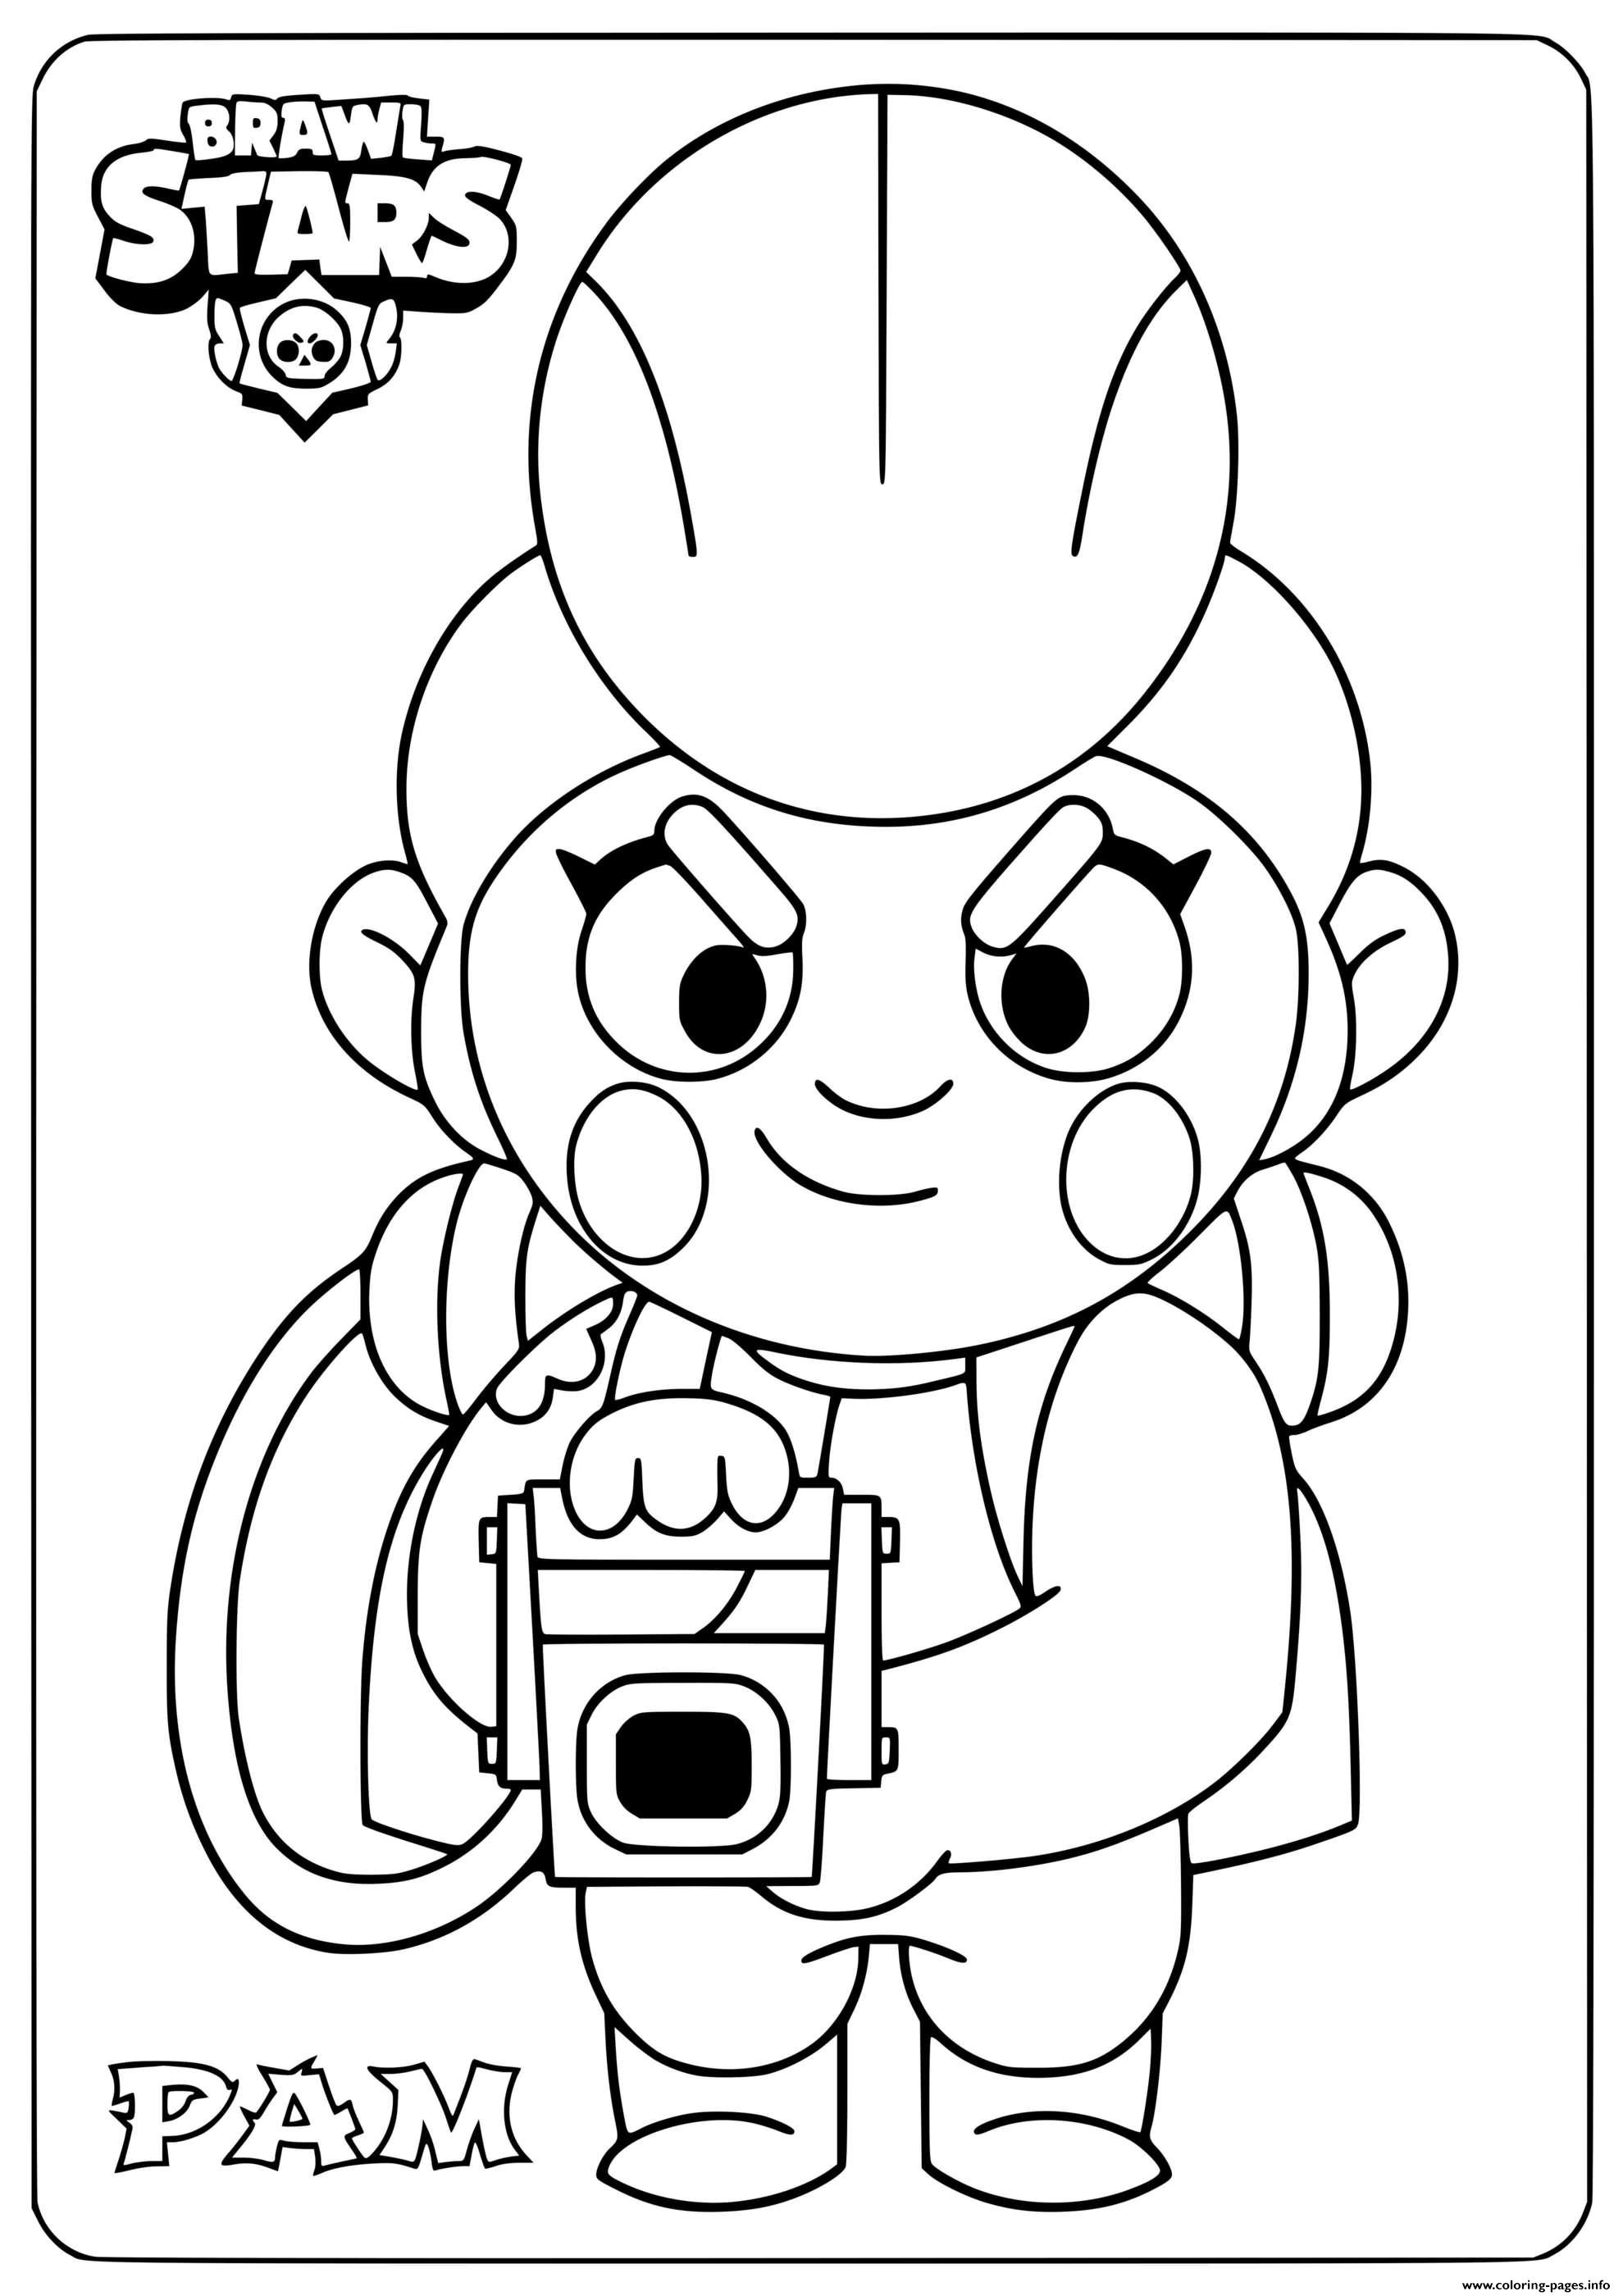 Brawl Stars Pam Coloring Pages Printable - coloriage brawl stars shelly